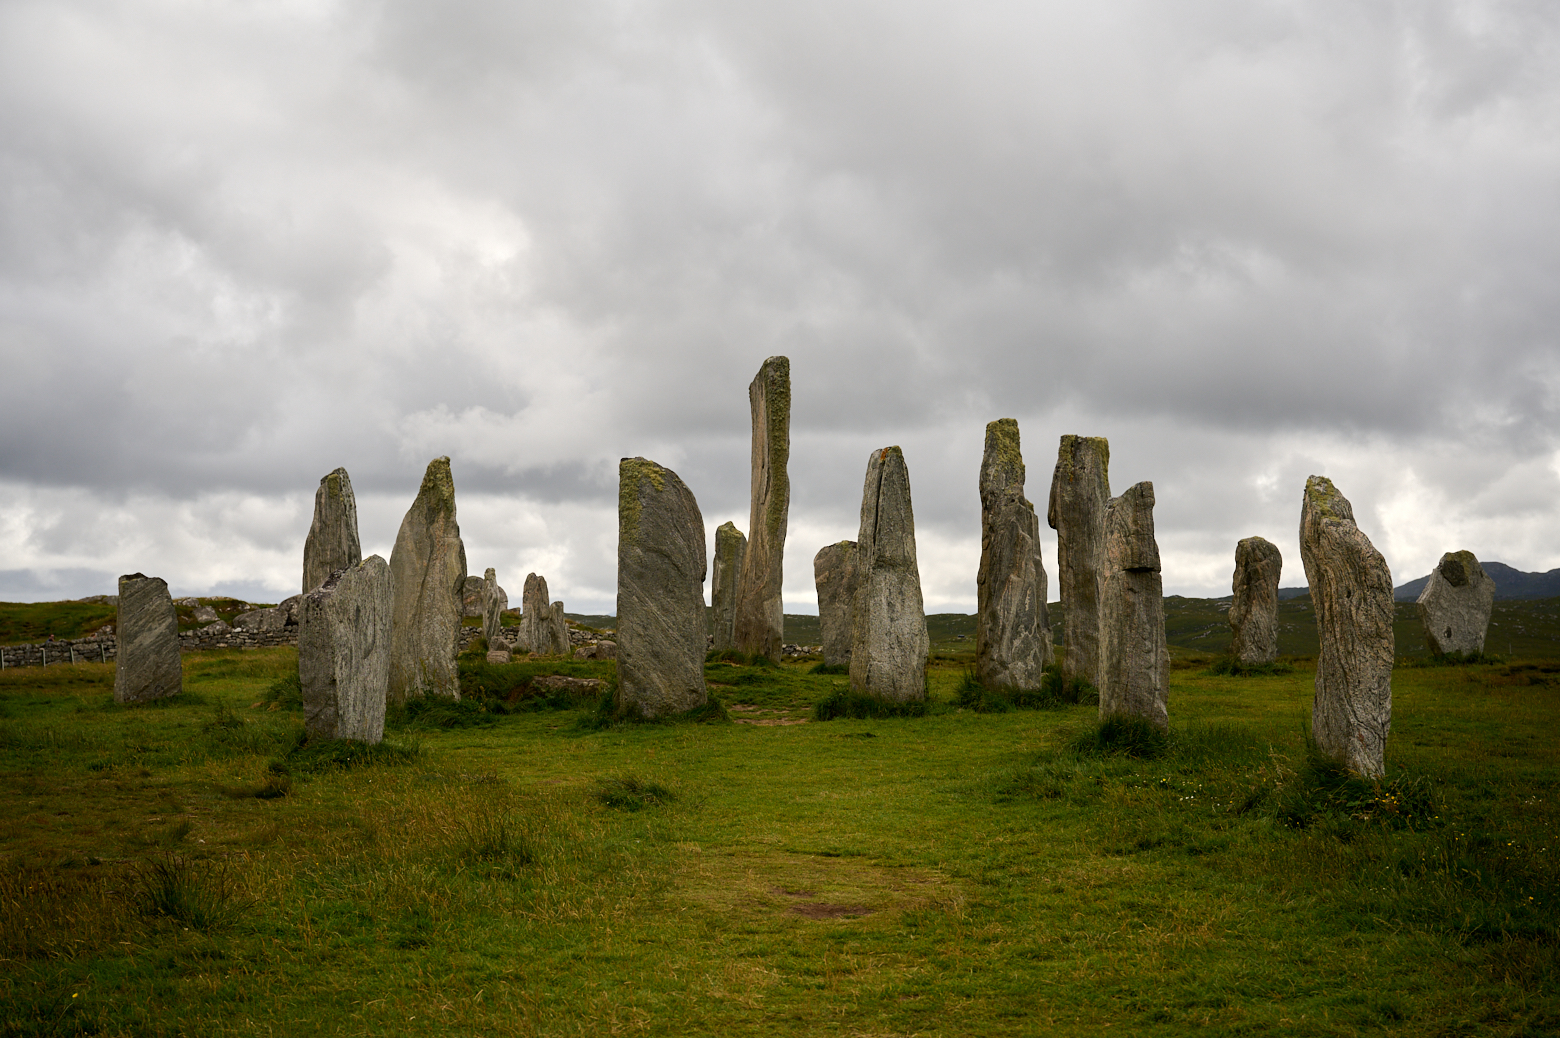 Visiting the standing stones in Callanish, Isle of Lewis